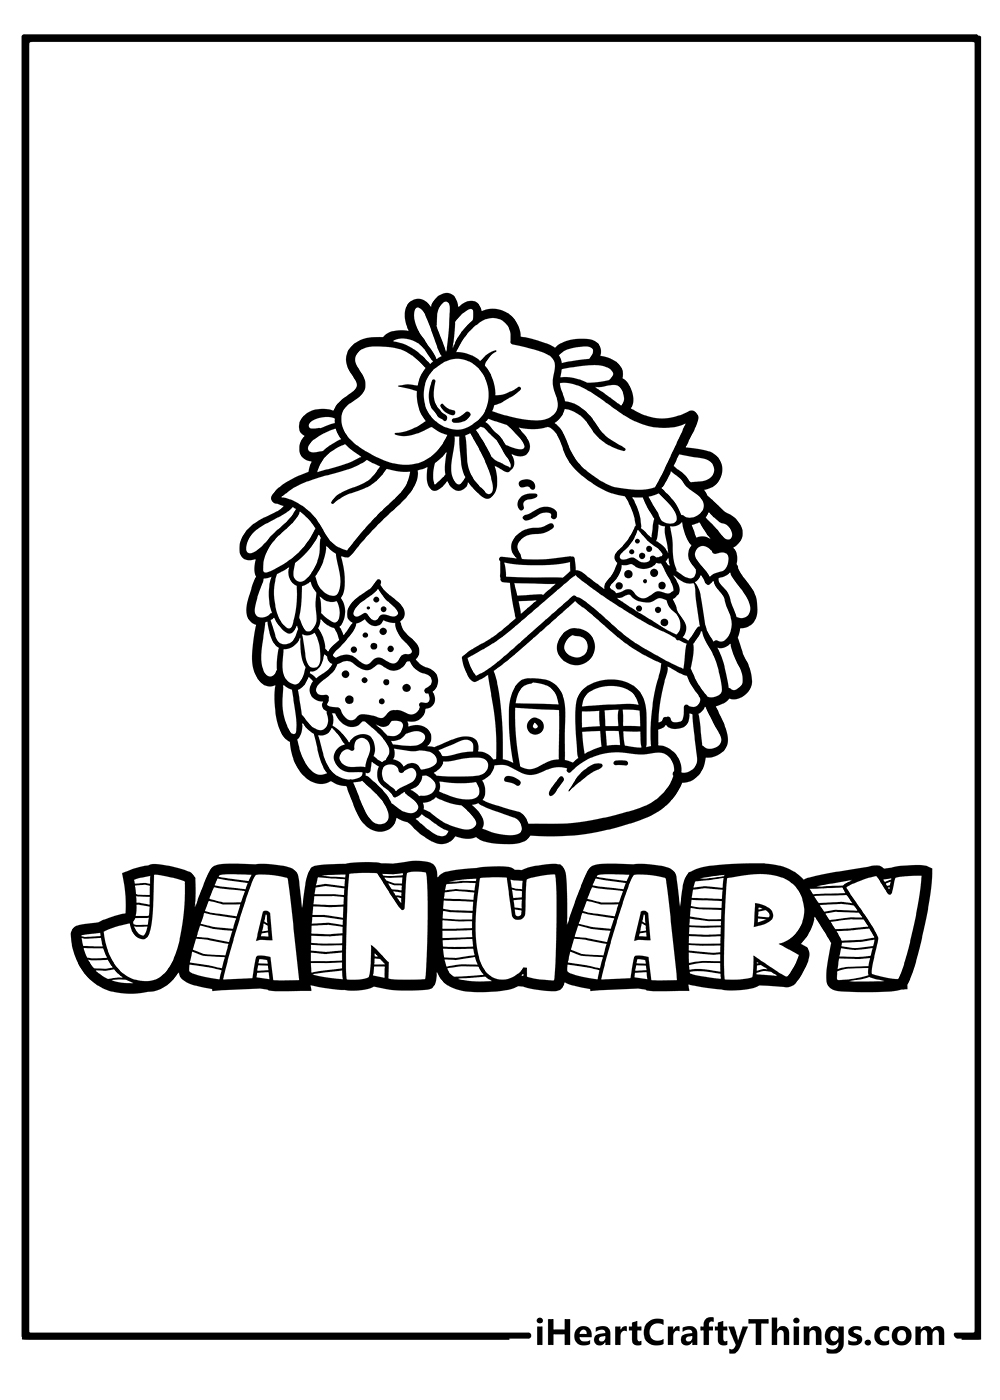 January Coloring Pages free pdf download